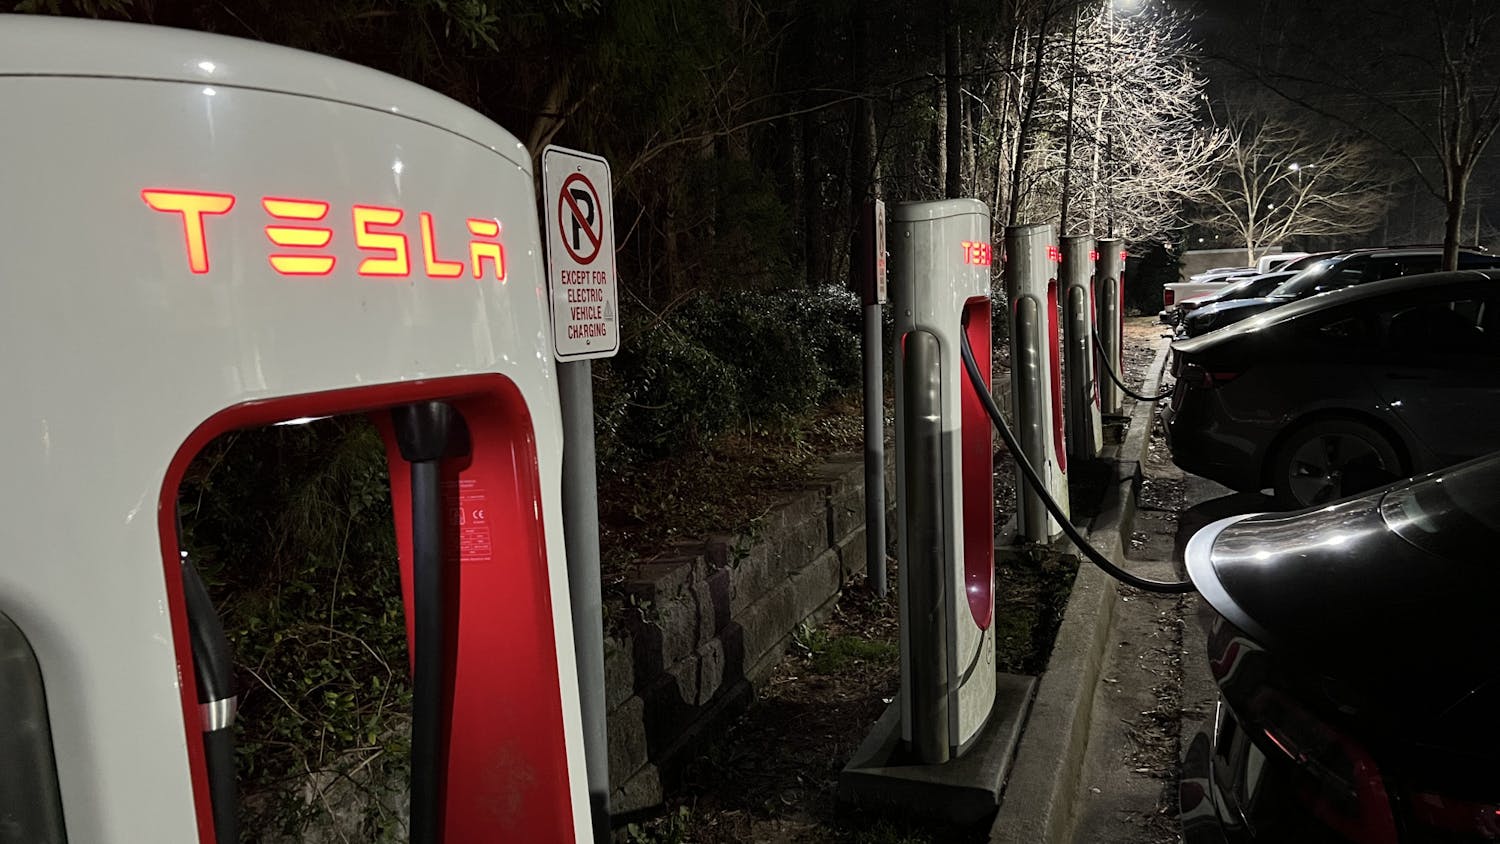 Tesla owner Laura Streit using one of the few available Tesla supercharging stations in Columbia, South Carolina, on Feb. 8, 2023. The charging station can take a Tesla Model 3 to full charge in eight and a half to 10 hours at a 220 voltage, giving it a range of 315 miles.&nbsp;